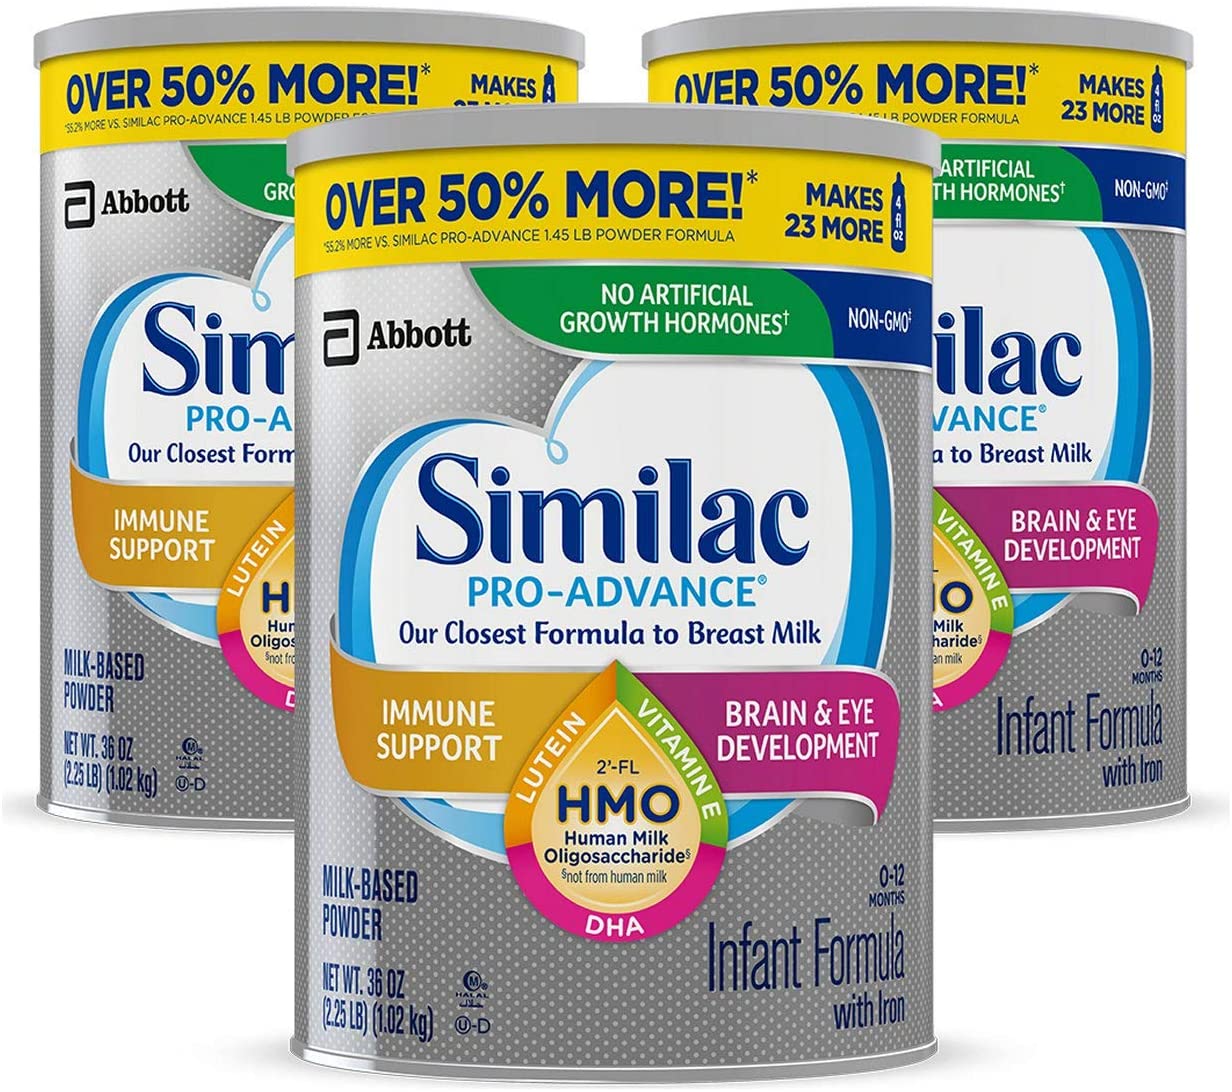 Similac Pro-Advance Non-GMO Infant Formula with Iron, with 2’-FL HMO, for Immune Support, Baby Formula, Powder, 36 Oz, Pack of 3